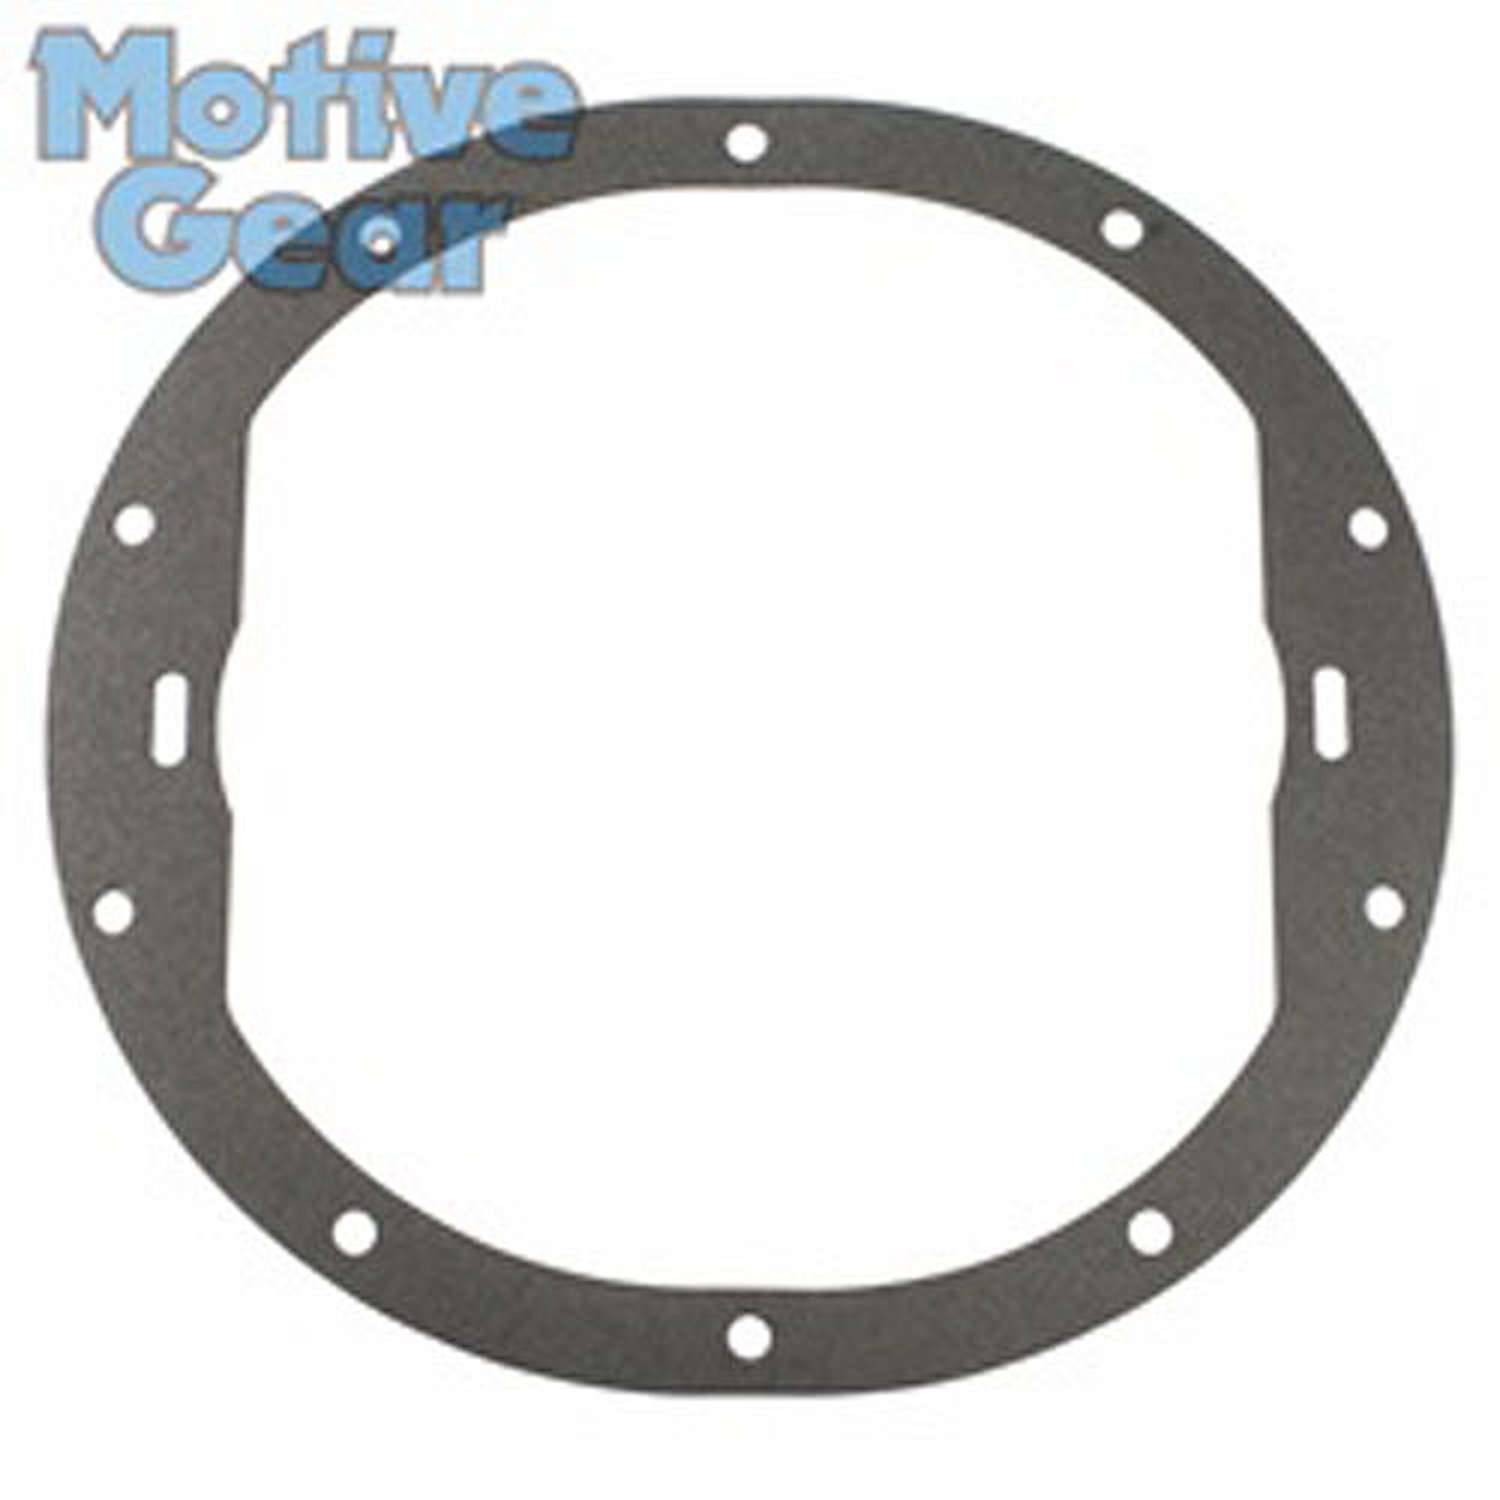 Differential Cover Gasket for GM 8.2 in., 8.5 in. and GM 8.625 in.